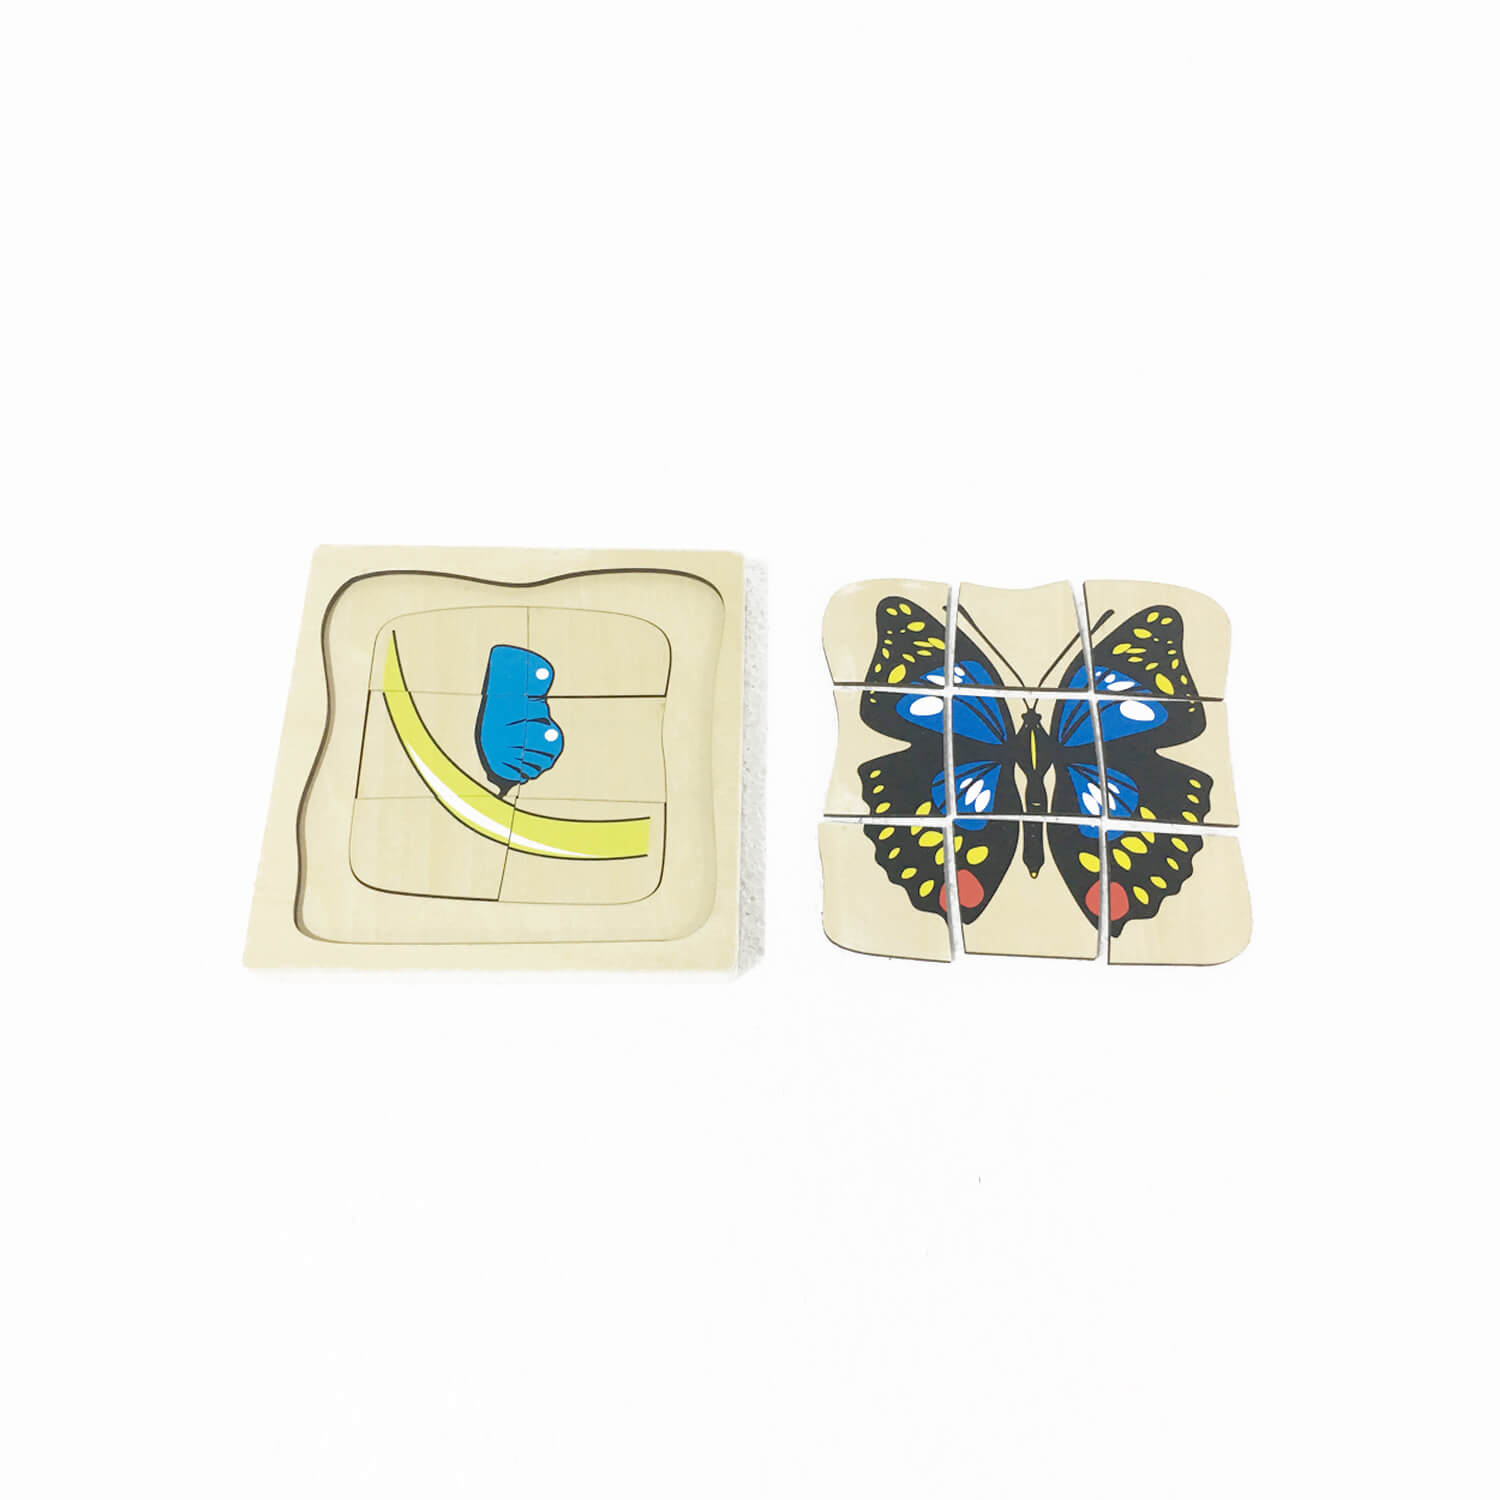 Animal Puzzle: Life Cycle Of Butterfly(5 Layers)